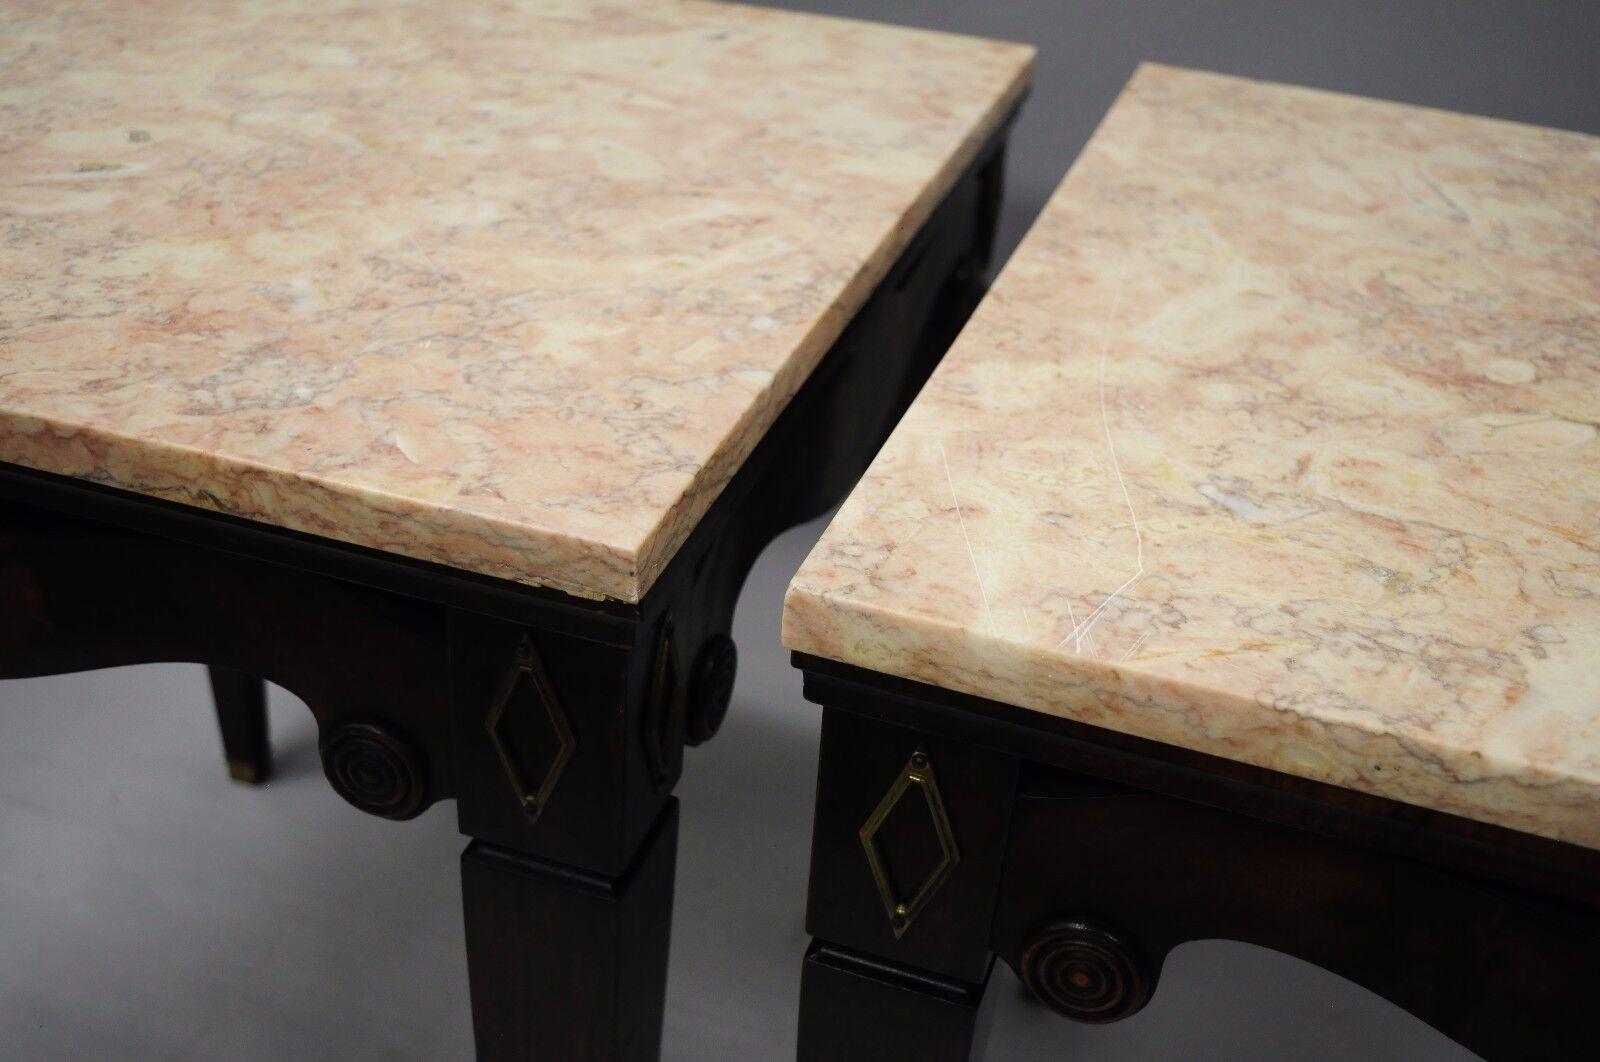 Pair of Antique Pink Marble-Top Mahogany End Tables Regency Square Weiman Era For Sale 4